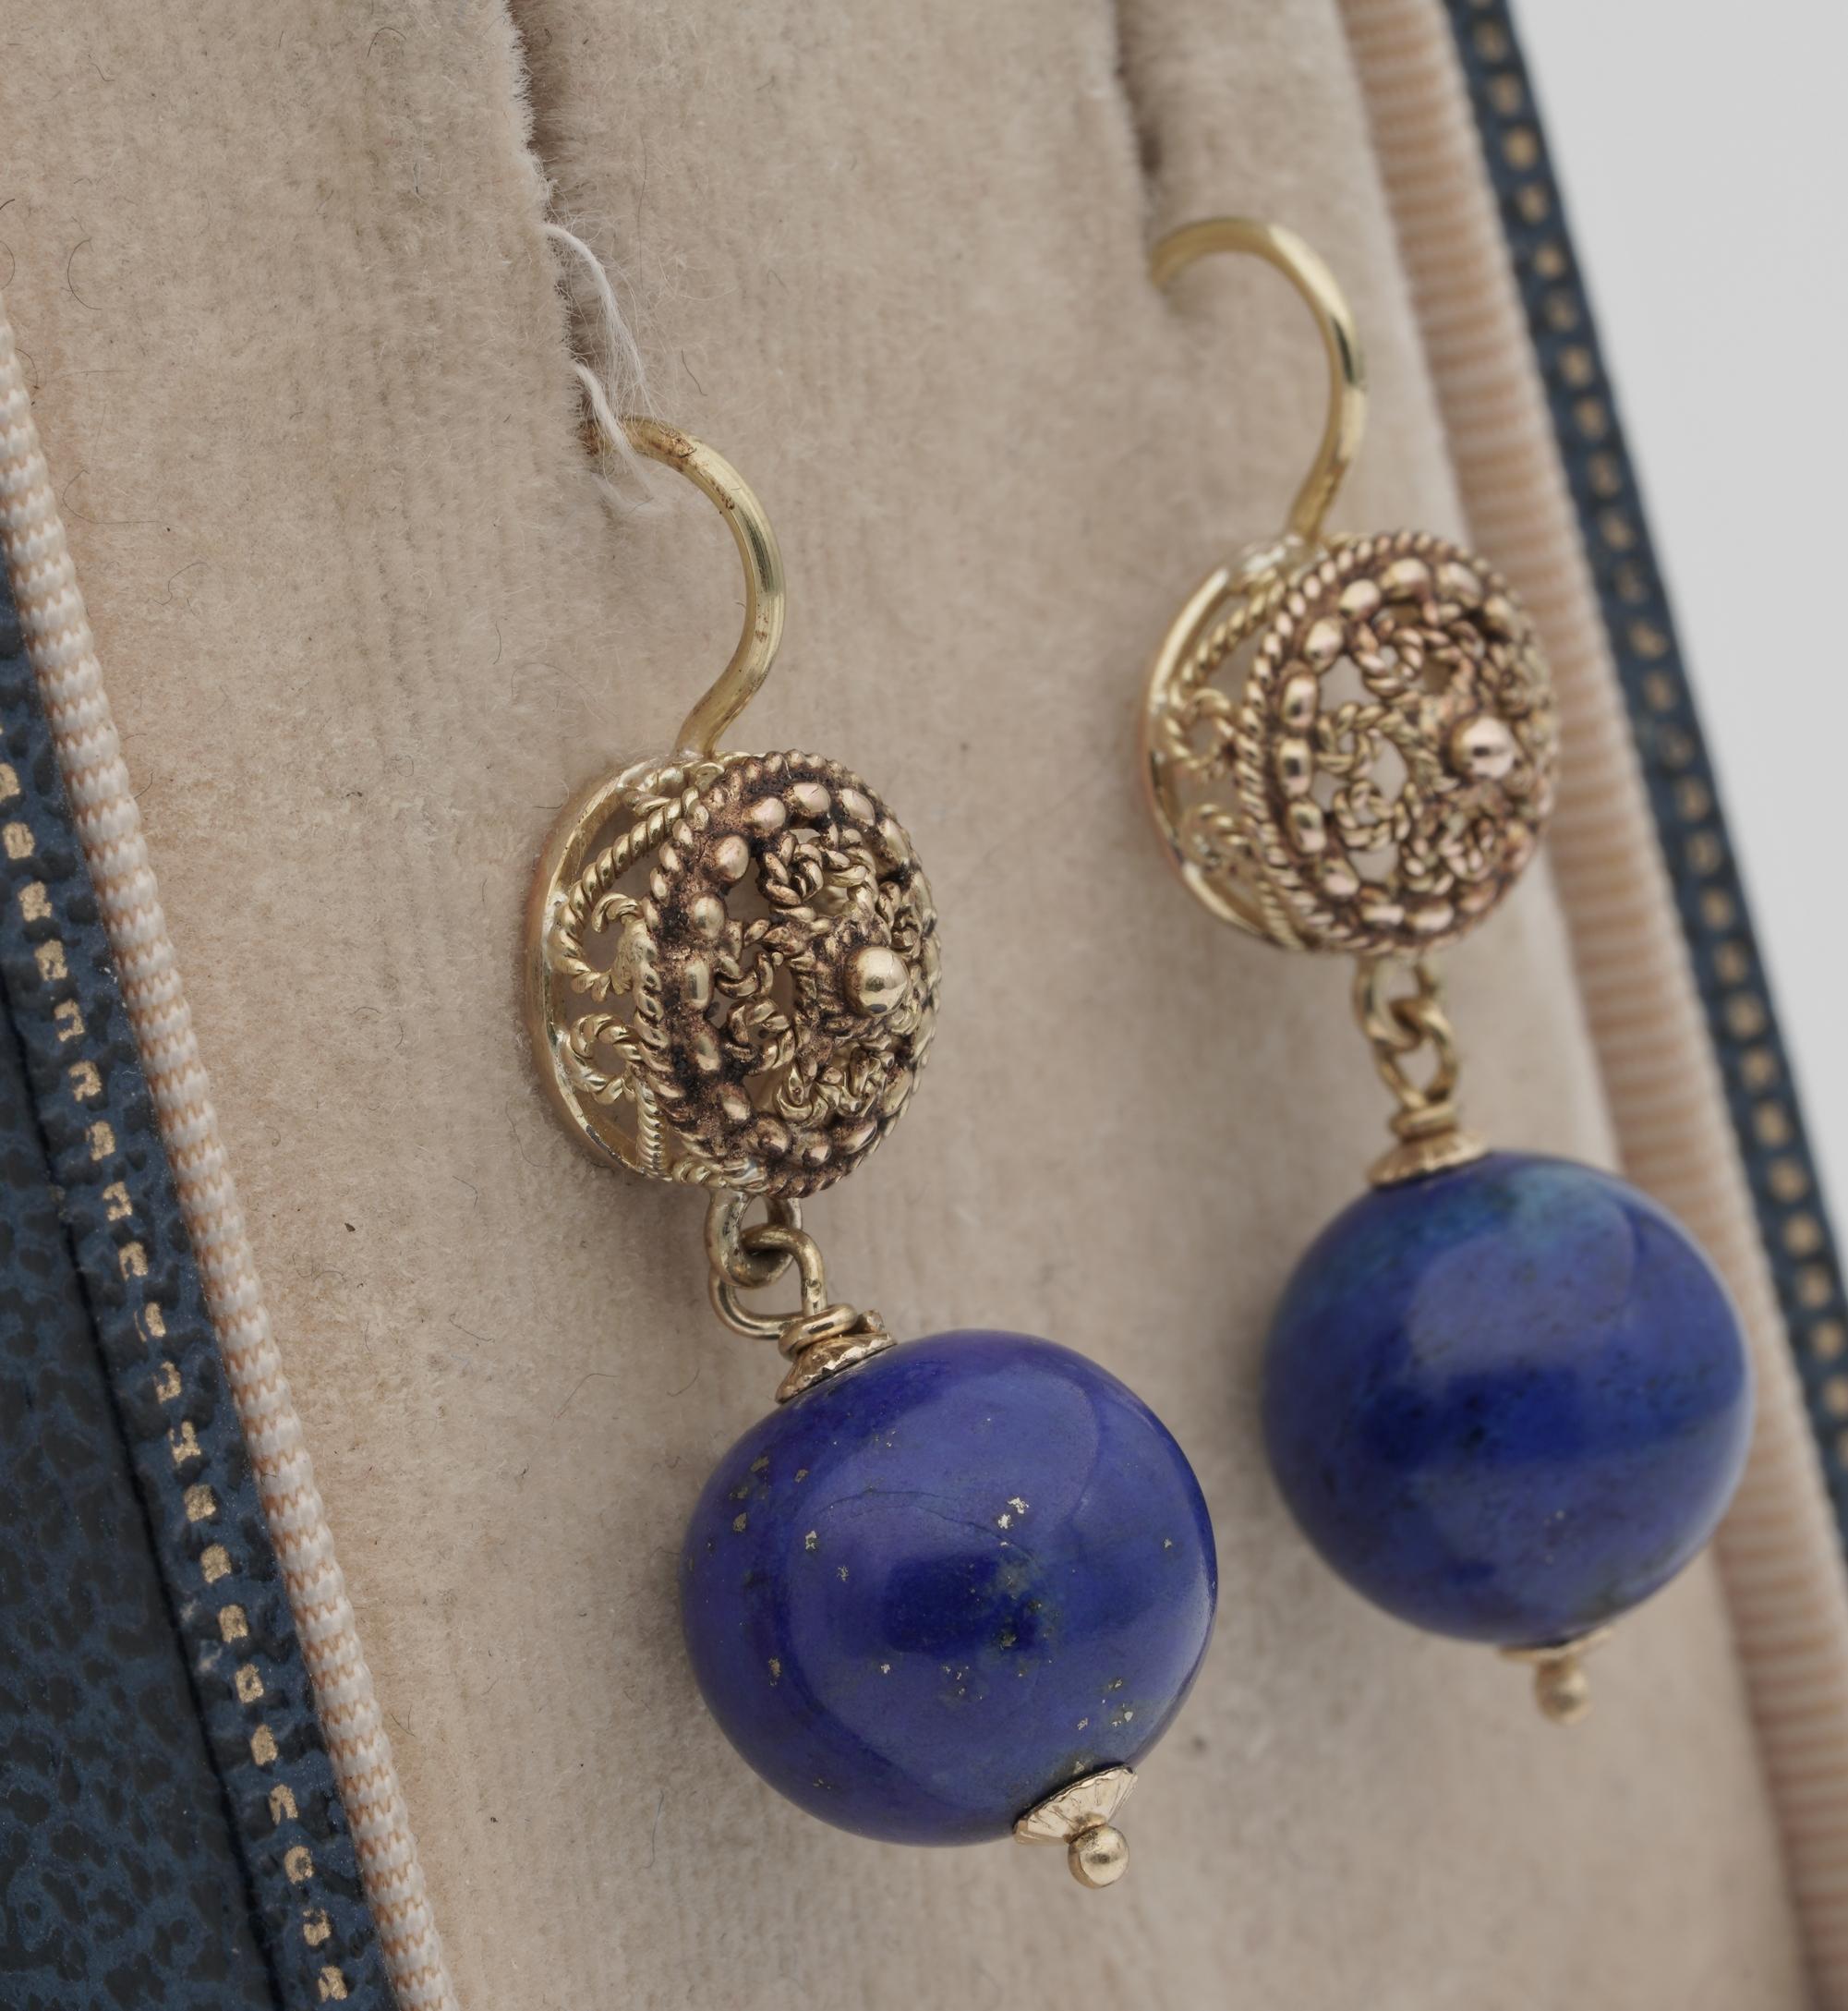 The Charming Blue

Eye catching and chic pair of mid century 14 Kt gold earrings in the ever loved Etruscan Revival
Round top hand crafted of fine granulation work, inspired from those works of ancient world, linked to a fantastic Blue Natural Lapis